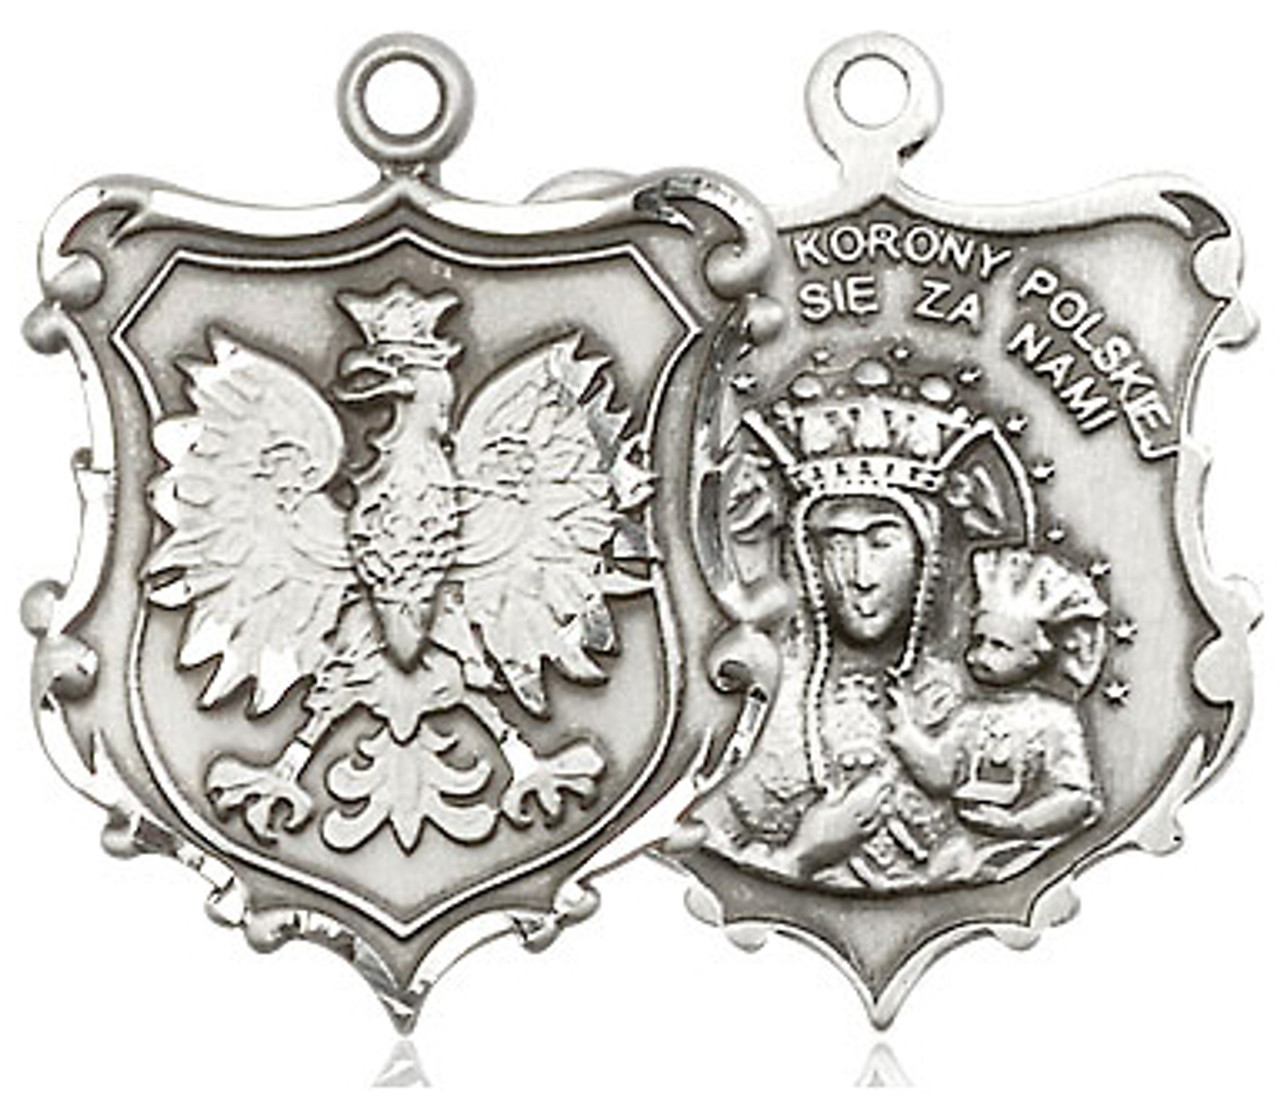 Sisters of Carmel: Our Lady of Czestochowa Medal Sterling Silver Polish Back